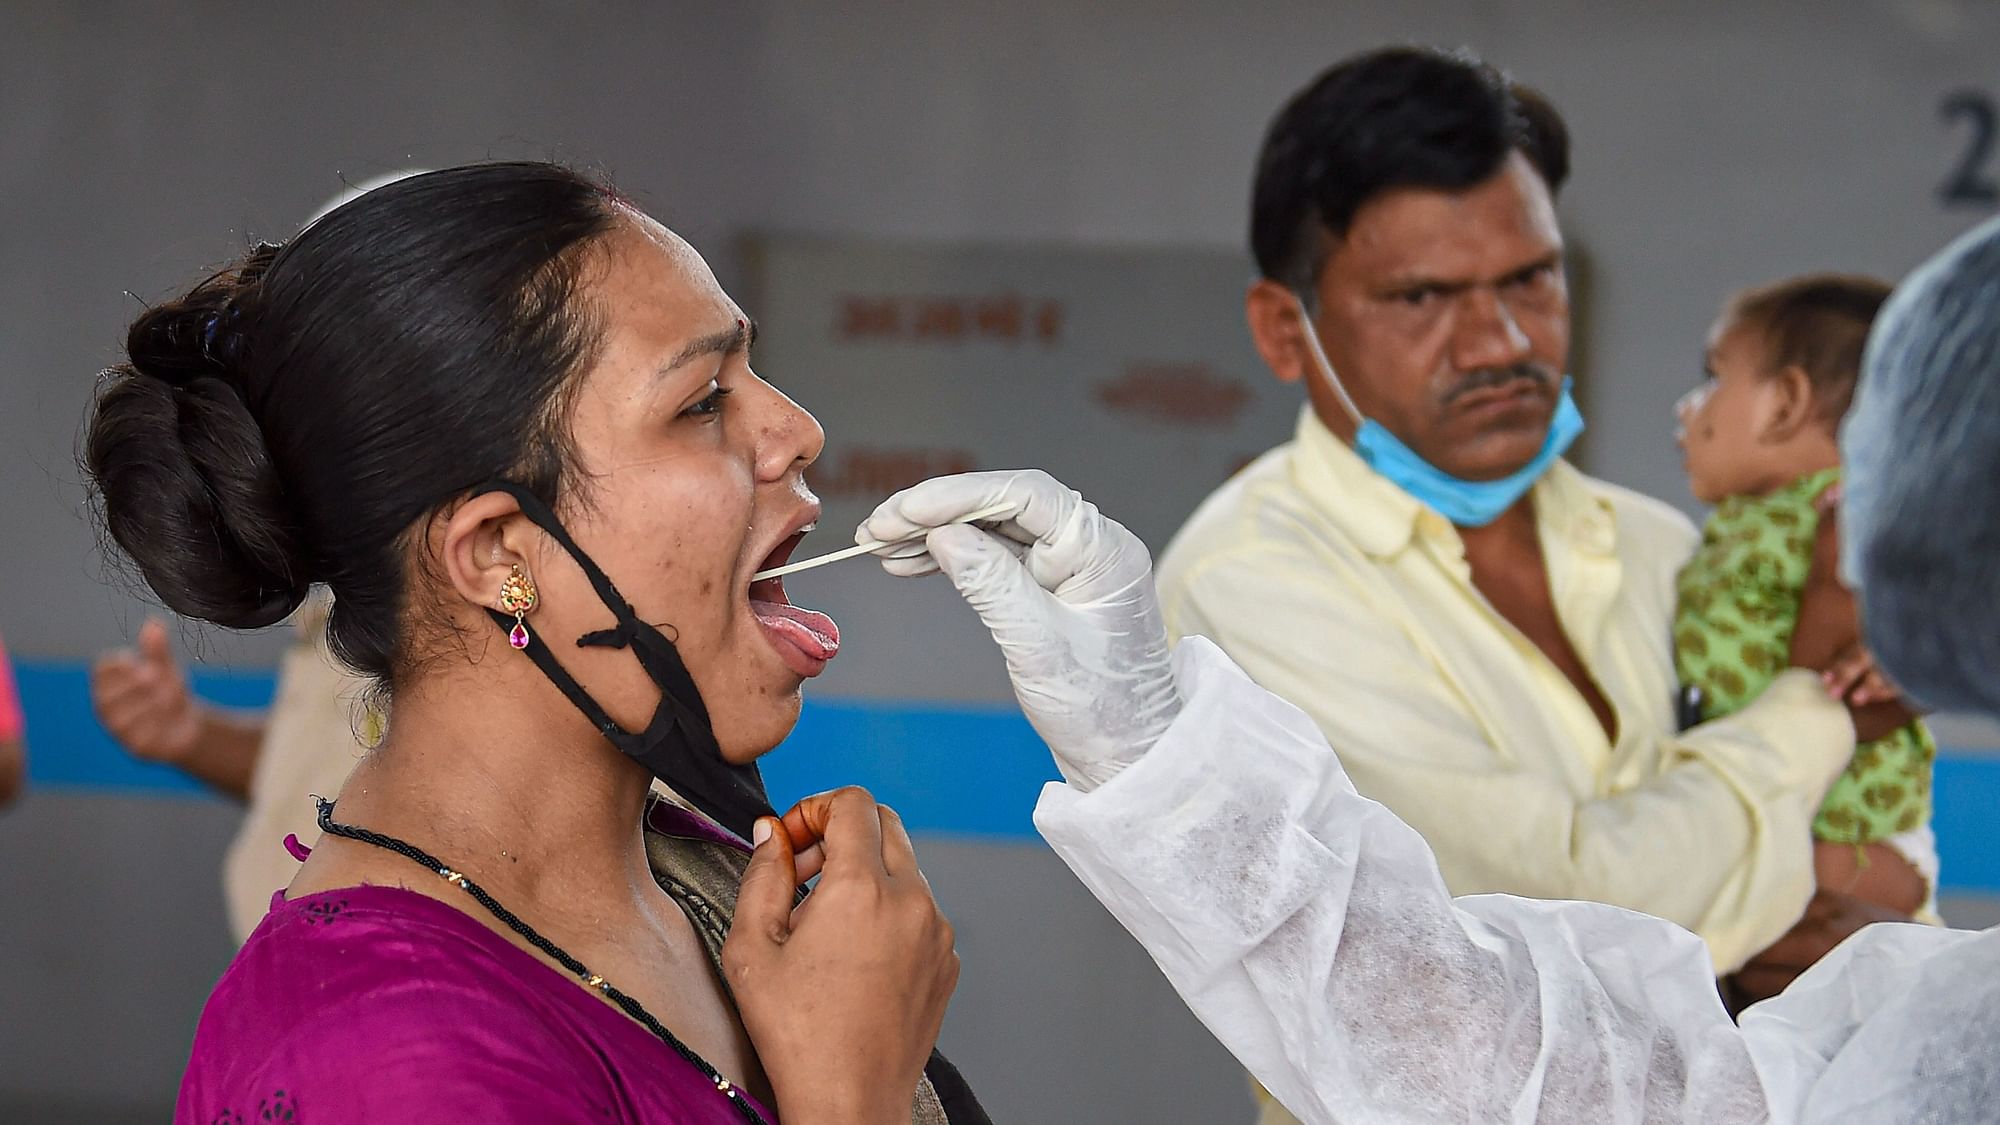 <div class="paragraphs"><p>India on Saturday, 31 July, reported 41,649 new COVID-19 cases, taking the total cases in the country to 3,16,13,993. Representational photo.</p></div>